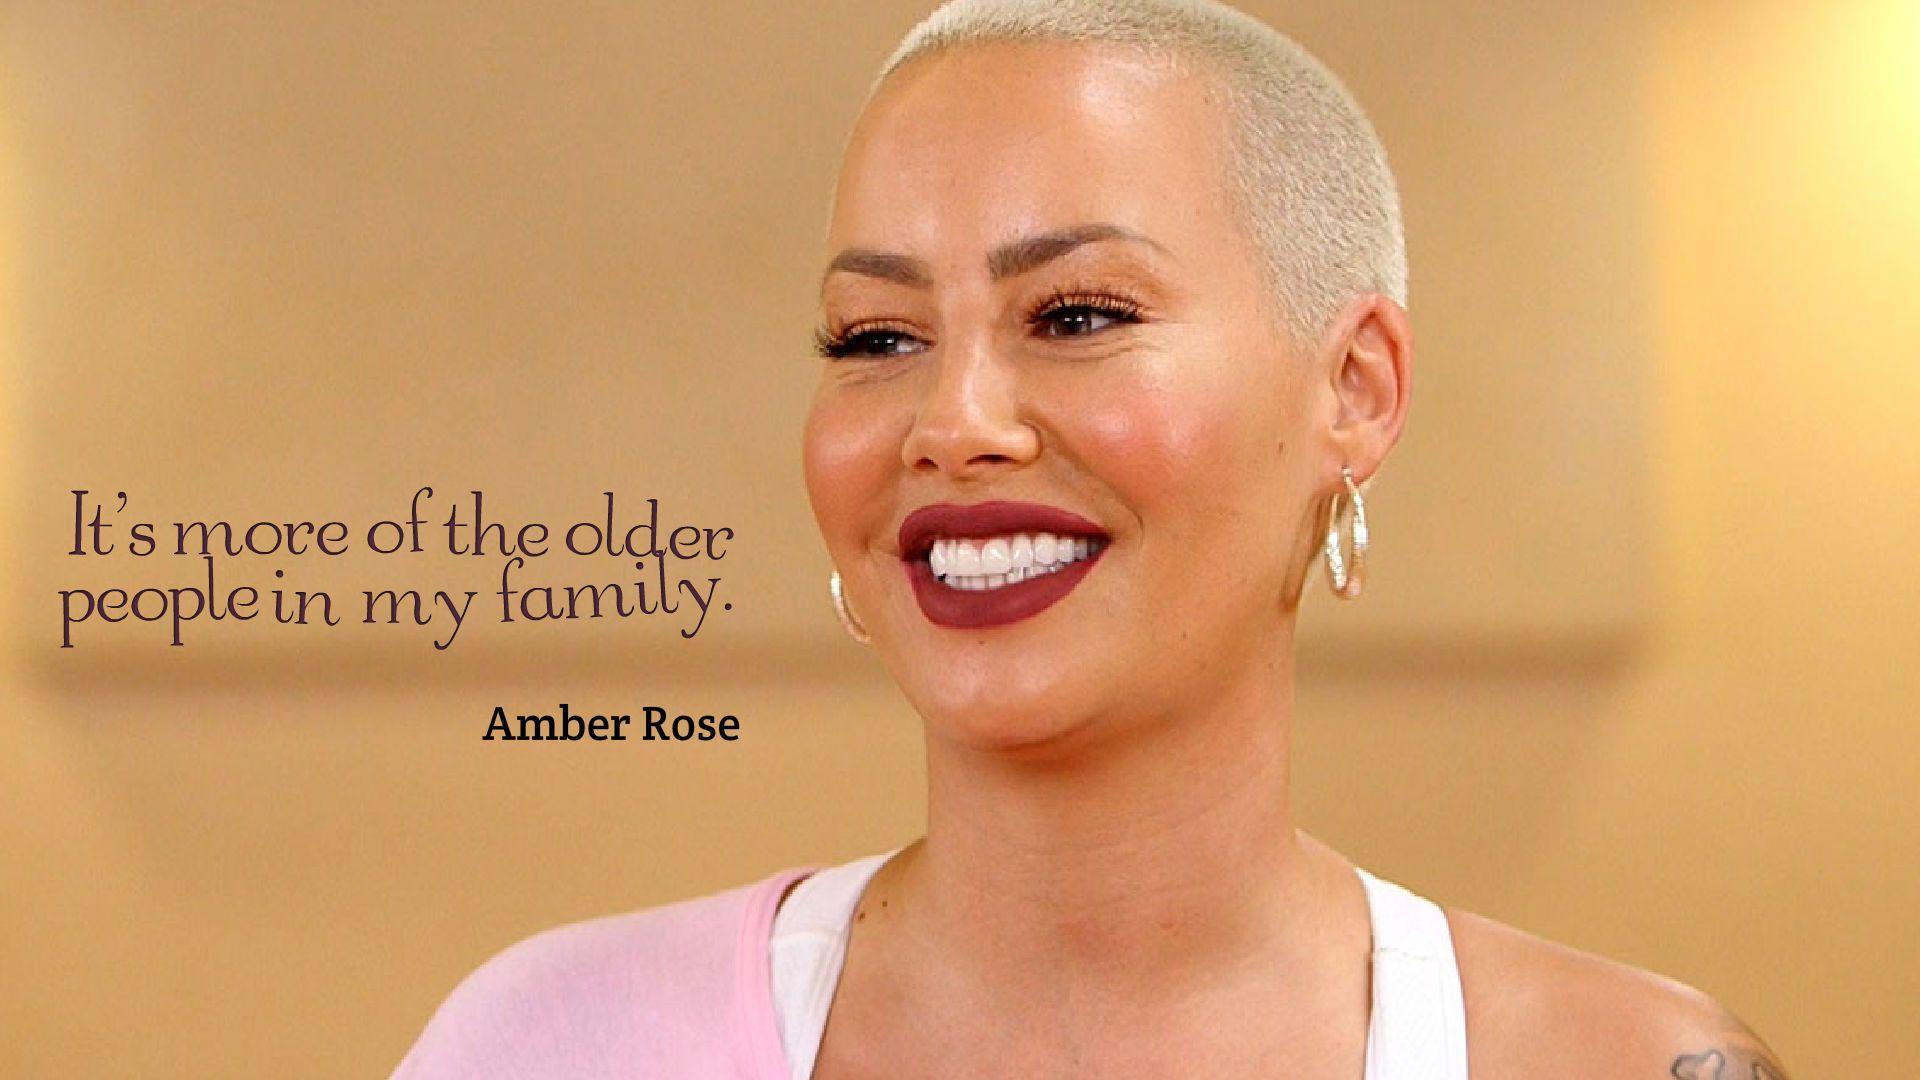 Amber Rose Quotes Background Wallpaper 13431